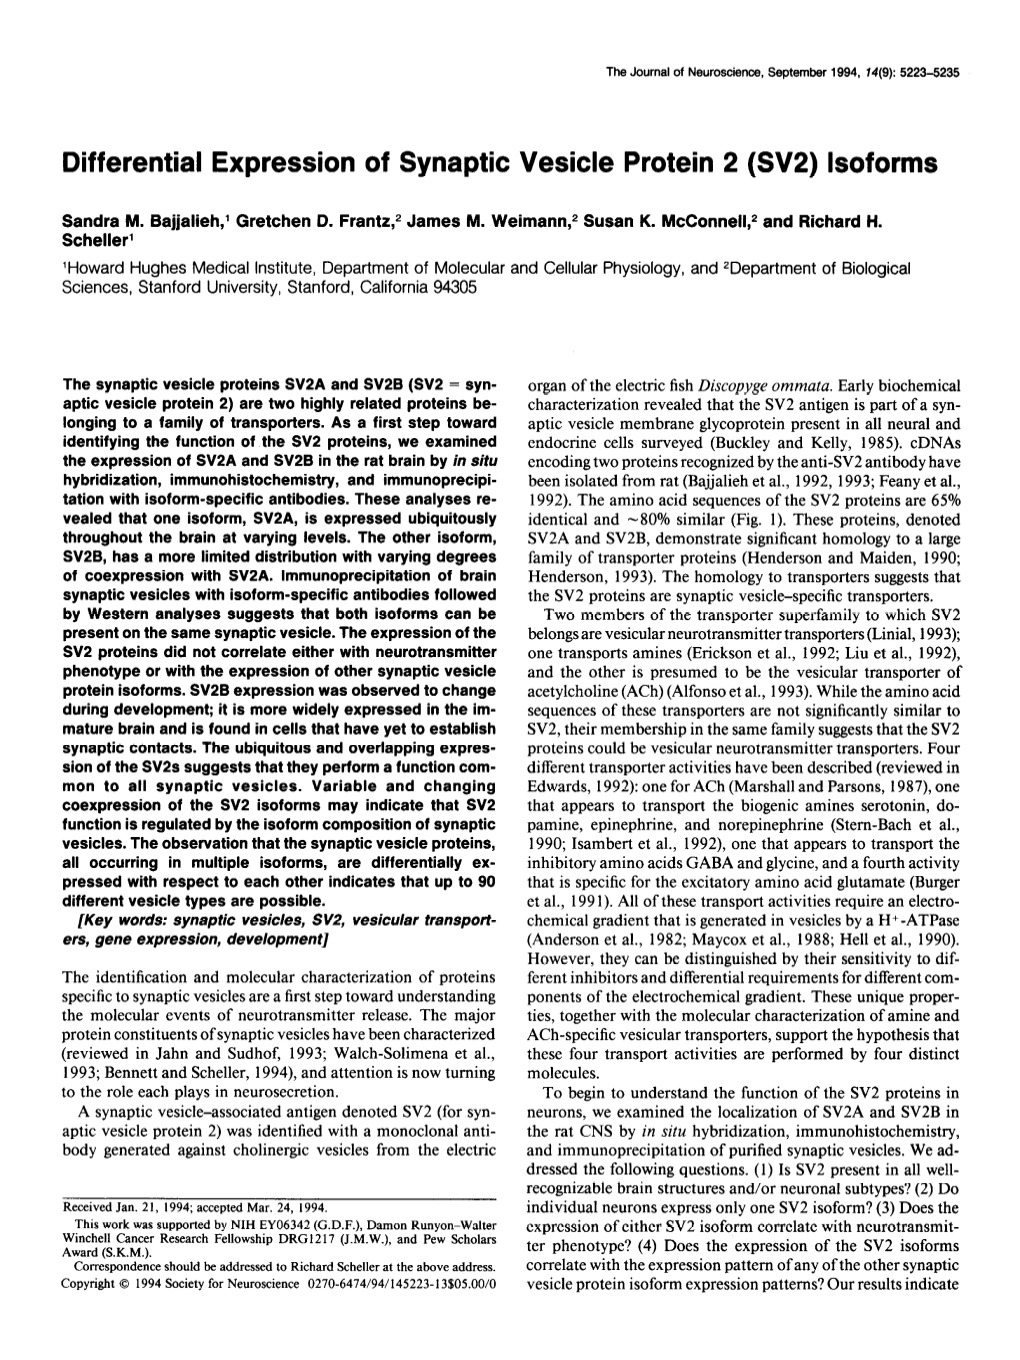 Differential Expression of Synaptic Vesicle Protein 2 (SV2) Lsoforms